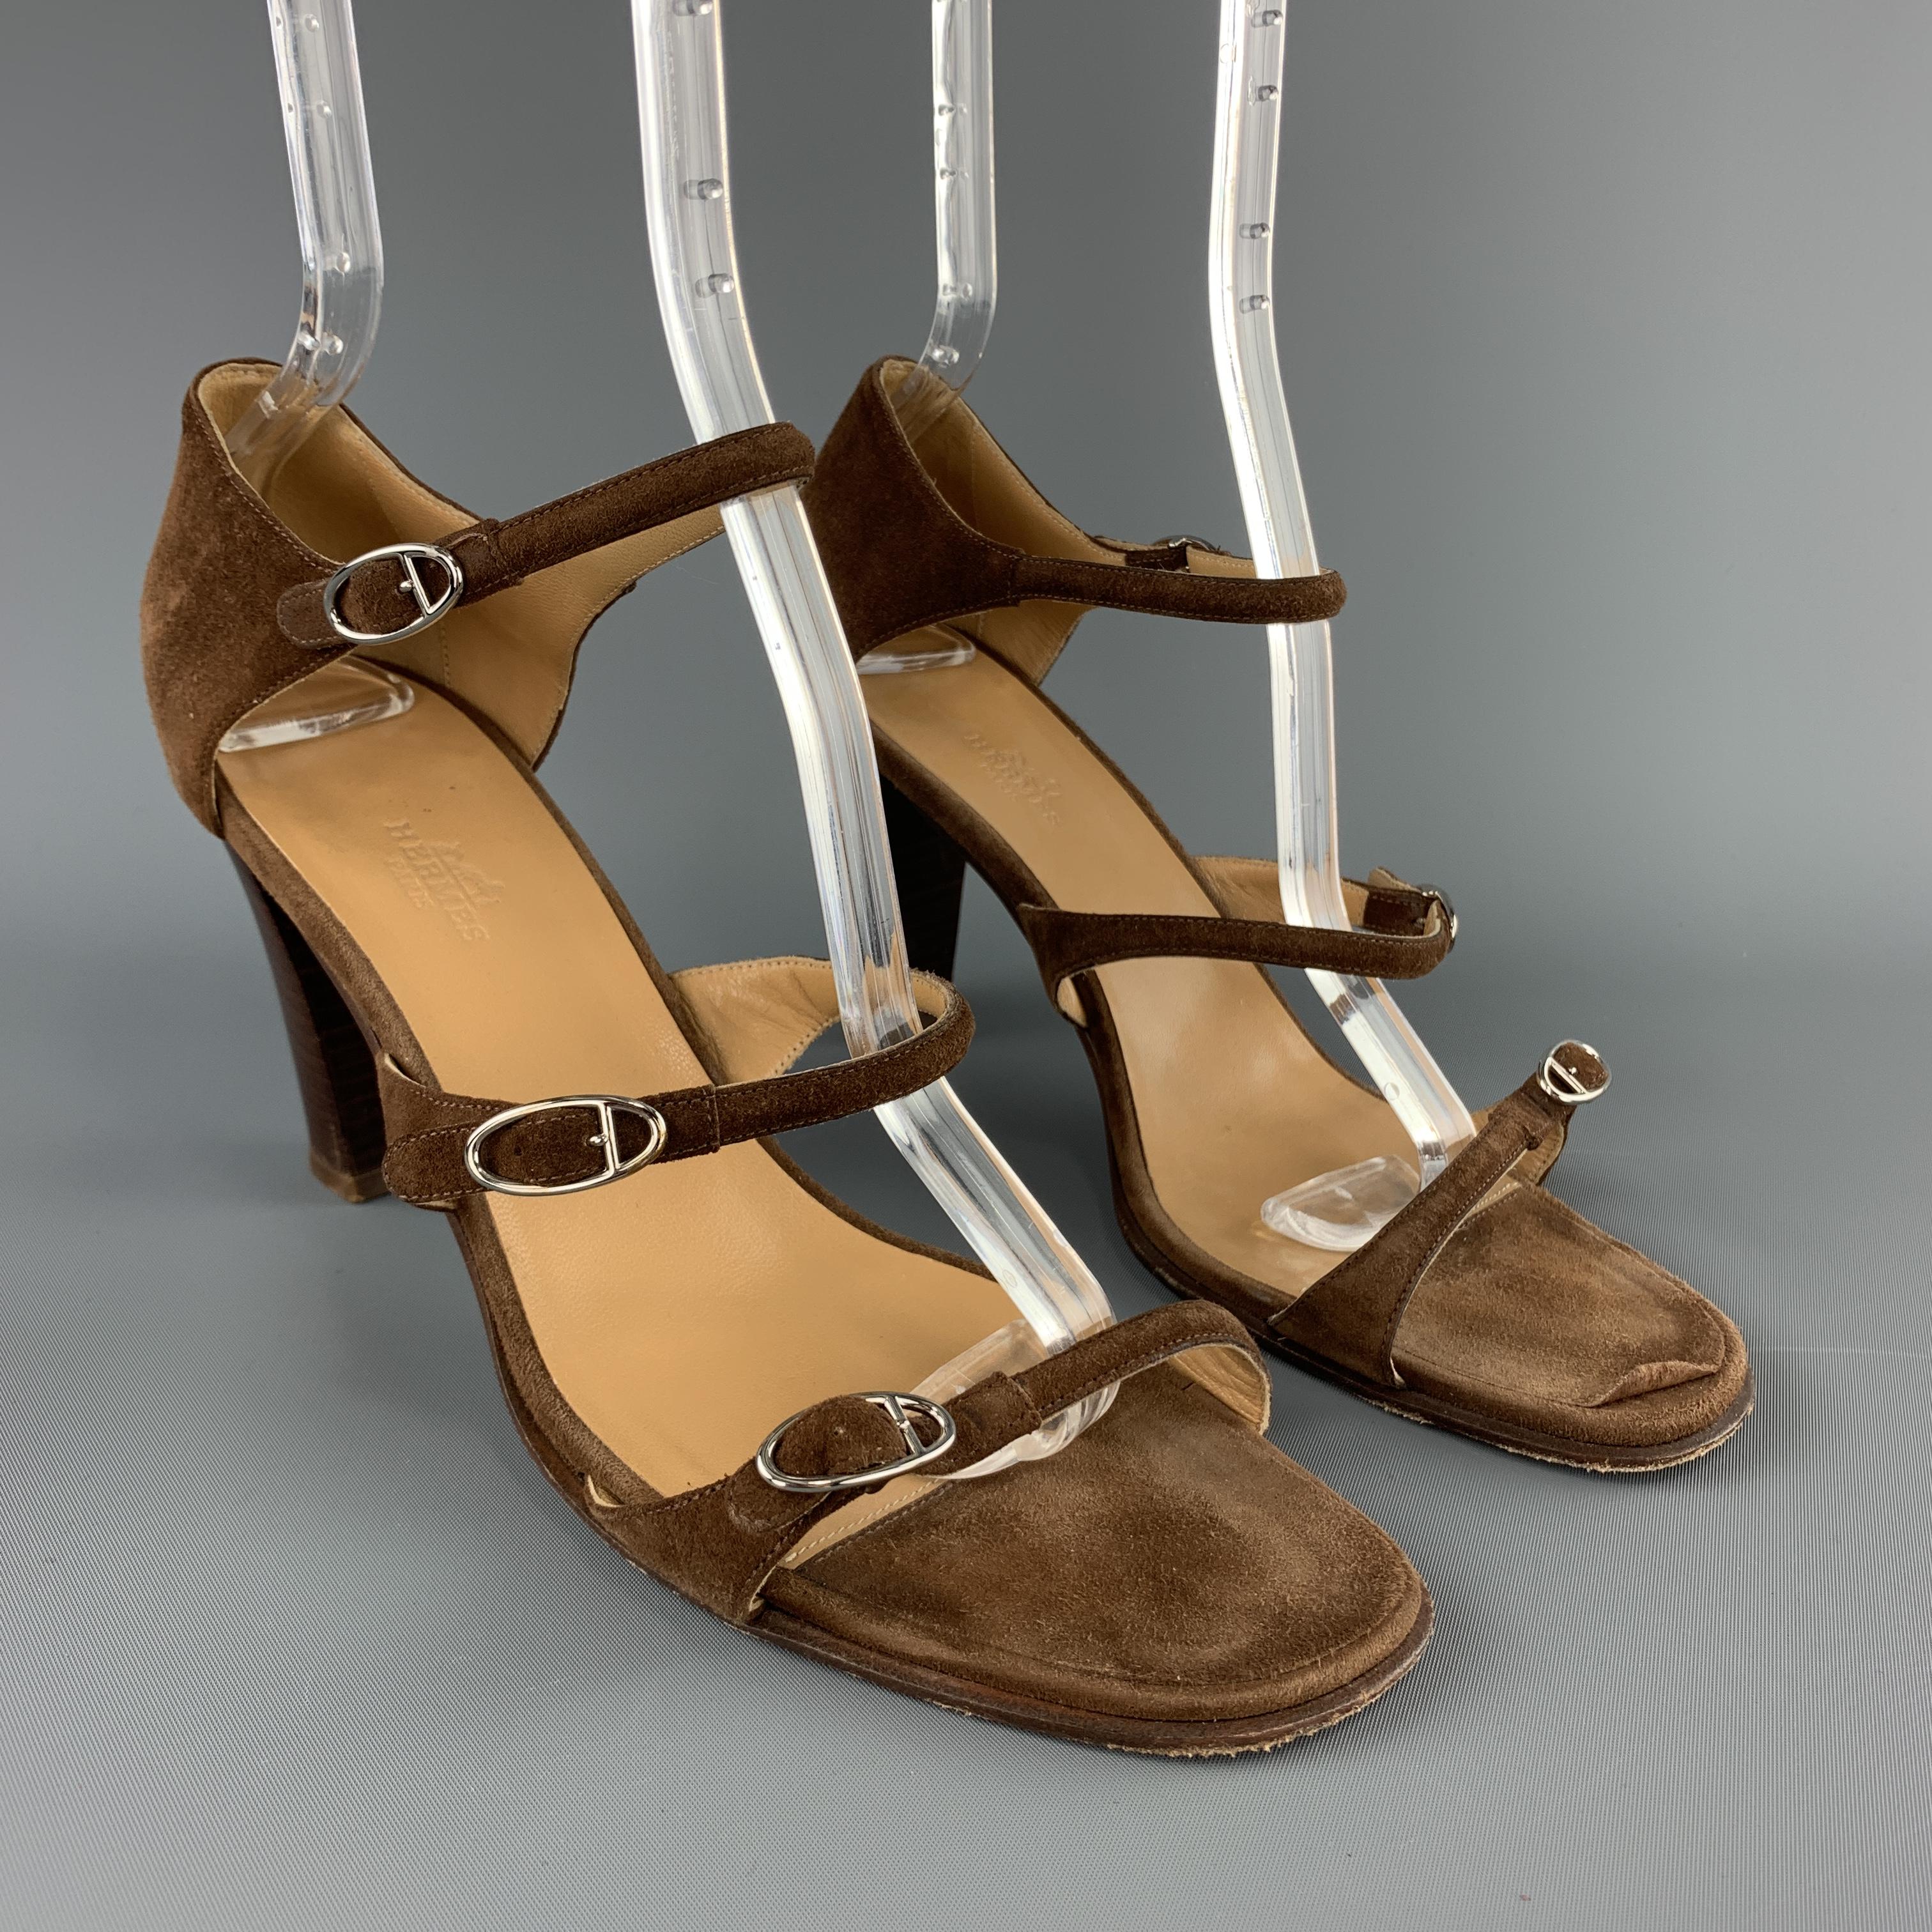 HERMES sandals come in warm brown suede with thee straps and a chunky stacked heel. Made in Italy.

Very Good Pre-Owned Condition.
Marked: IT 40

Heel: 3.5 in.